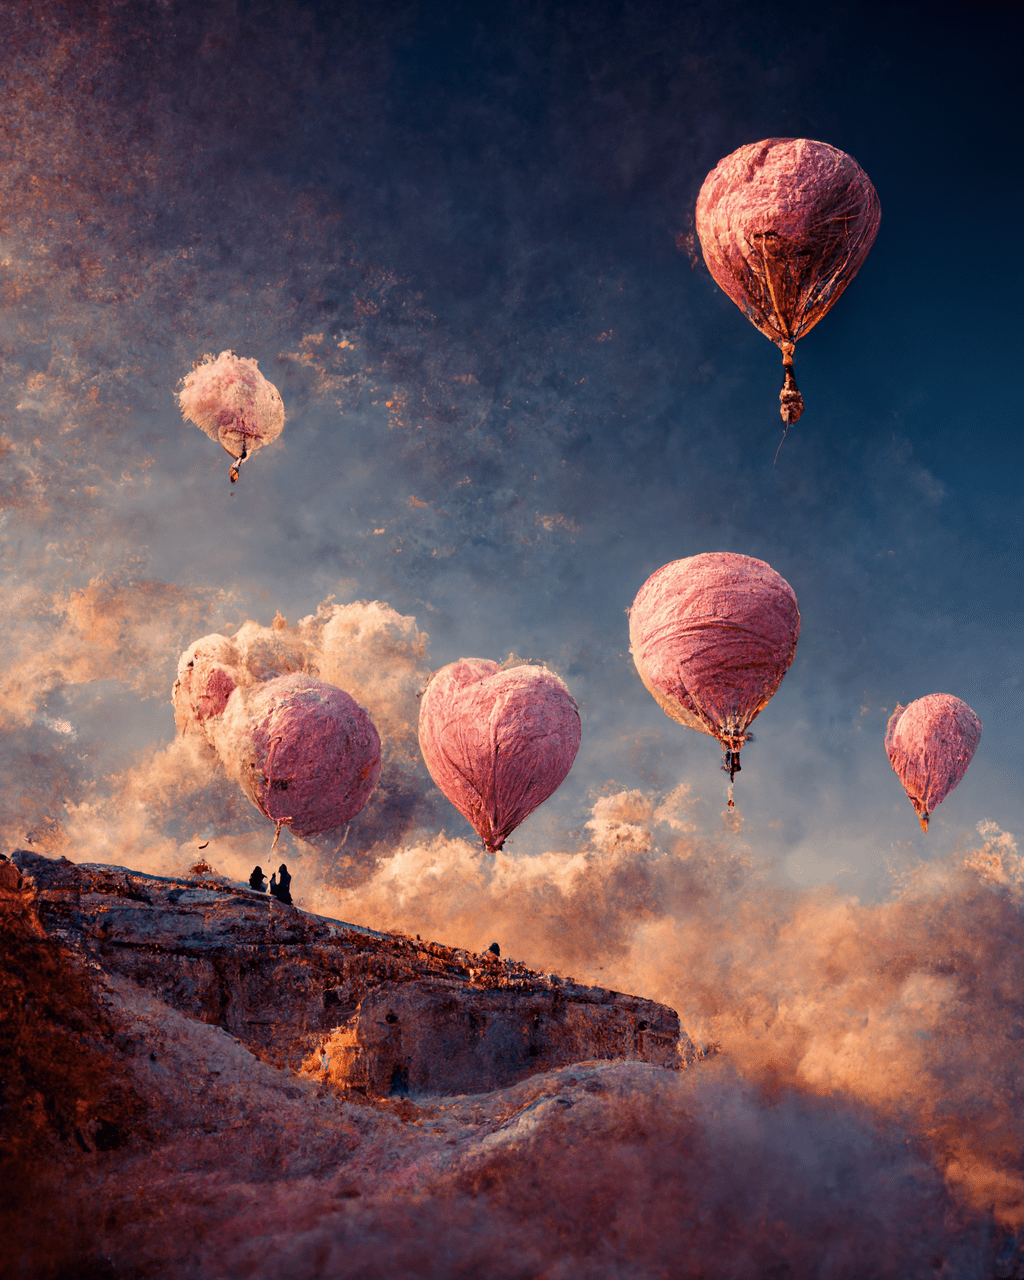 A group of hot air balloons floating in the sky - Hot air balloons